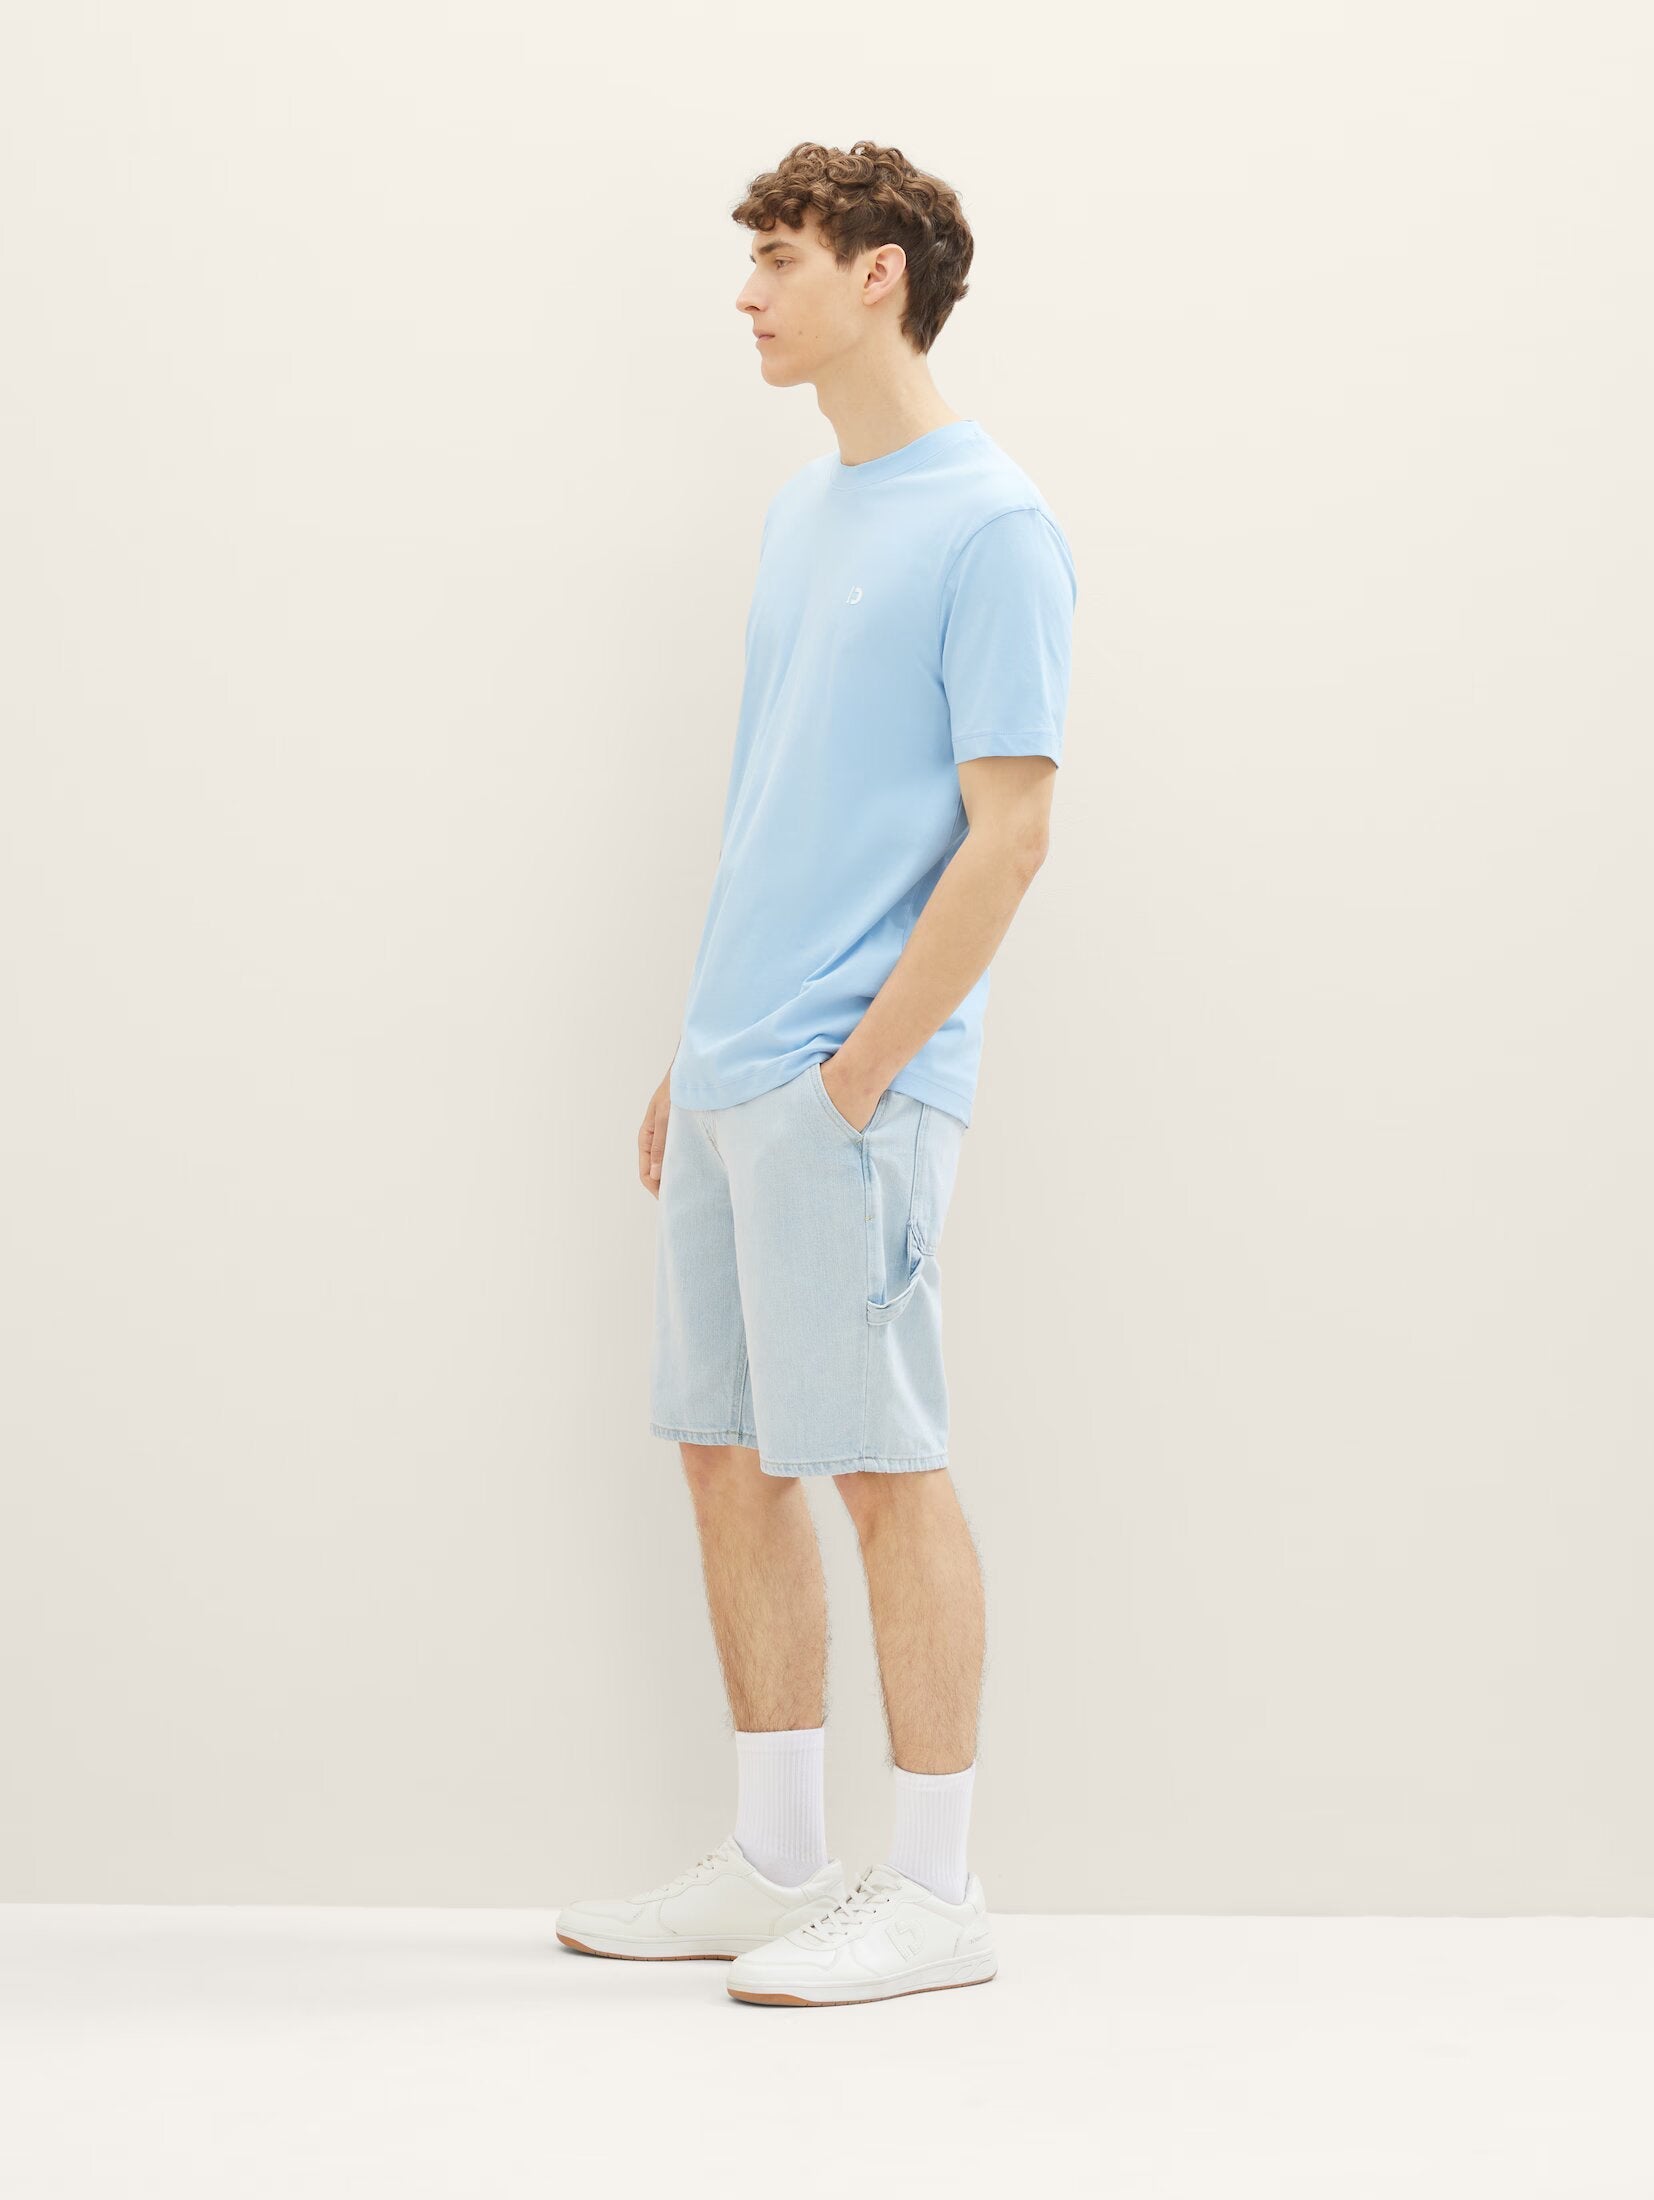 Tom Tailor Basic Washed Out Middle Blue T-shirt